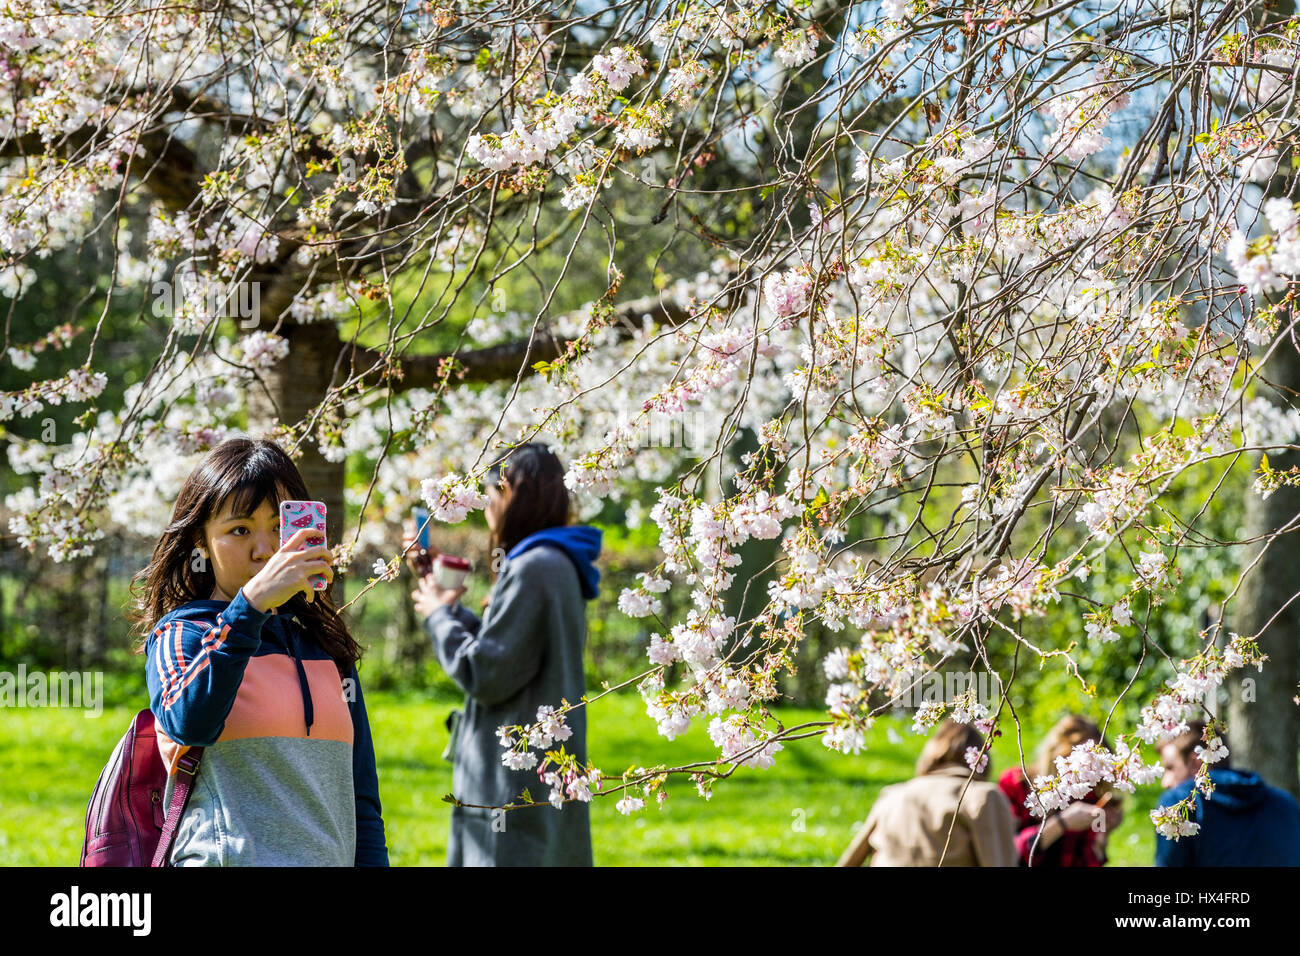 A beautiful sunny Saturday afternoon found Londoners and tourists alike taking selfies amongst the cherry blossom trees and enjoying the warm sunshine inThe Regents Park, London, UK Stock Photo